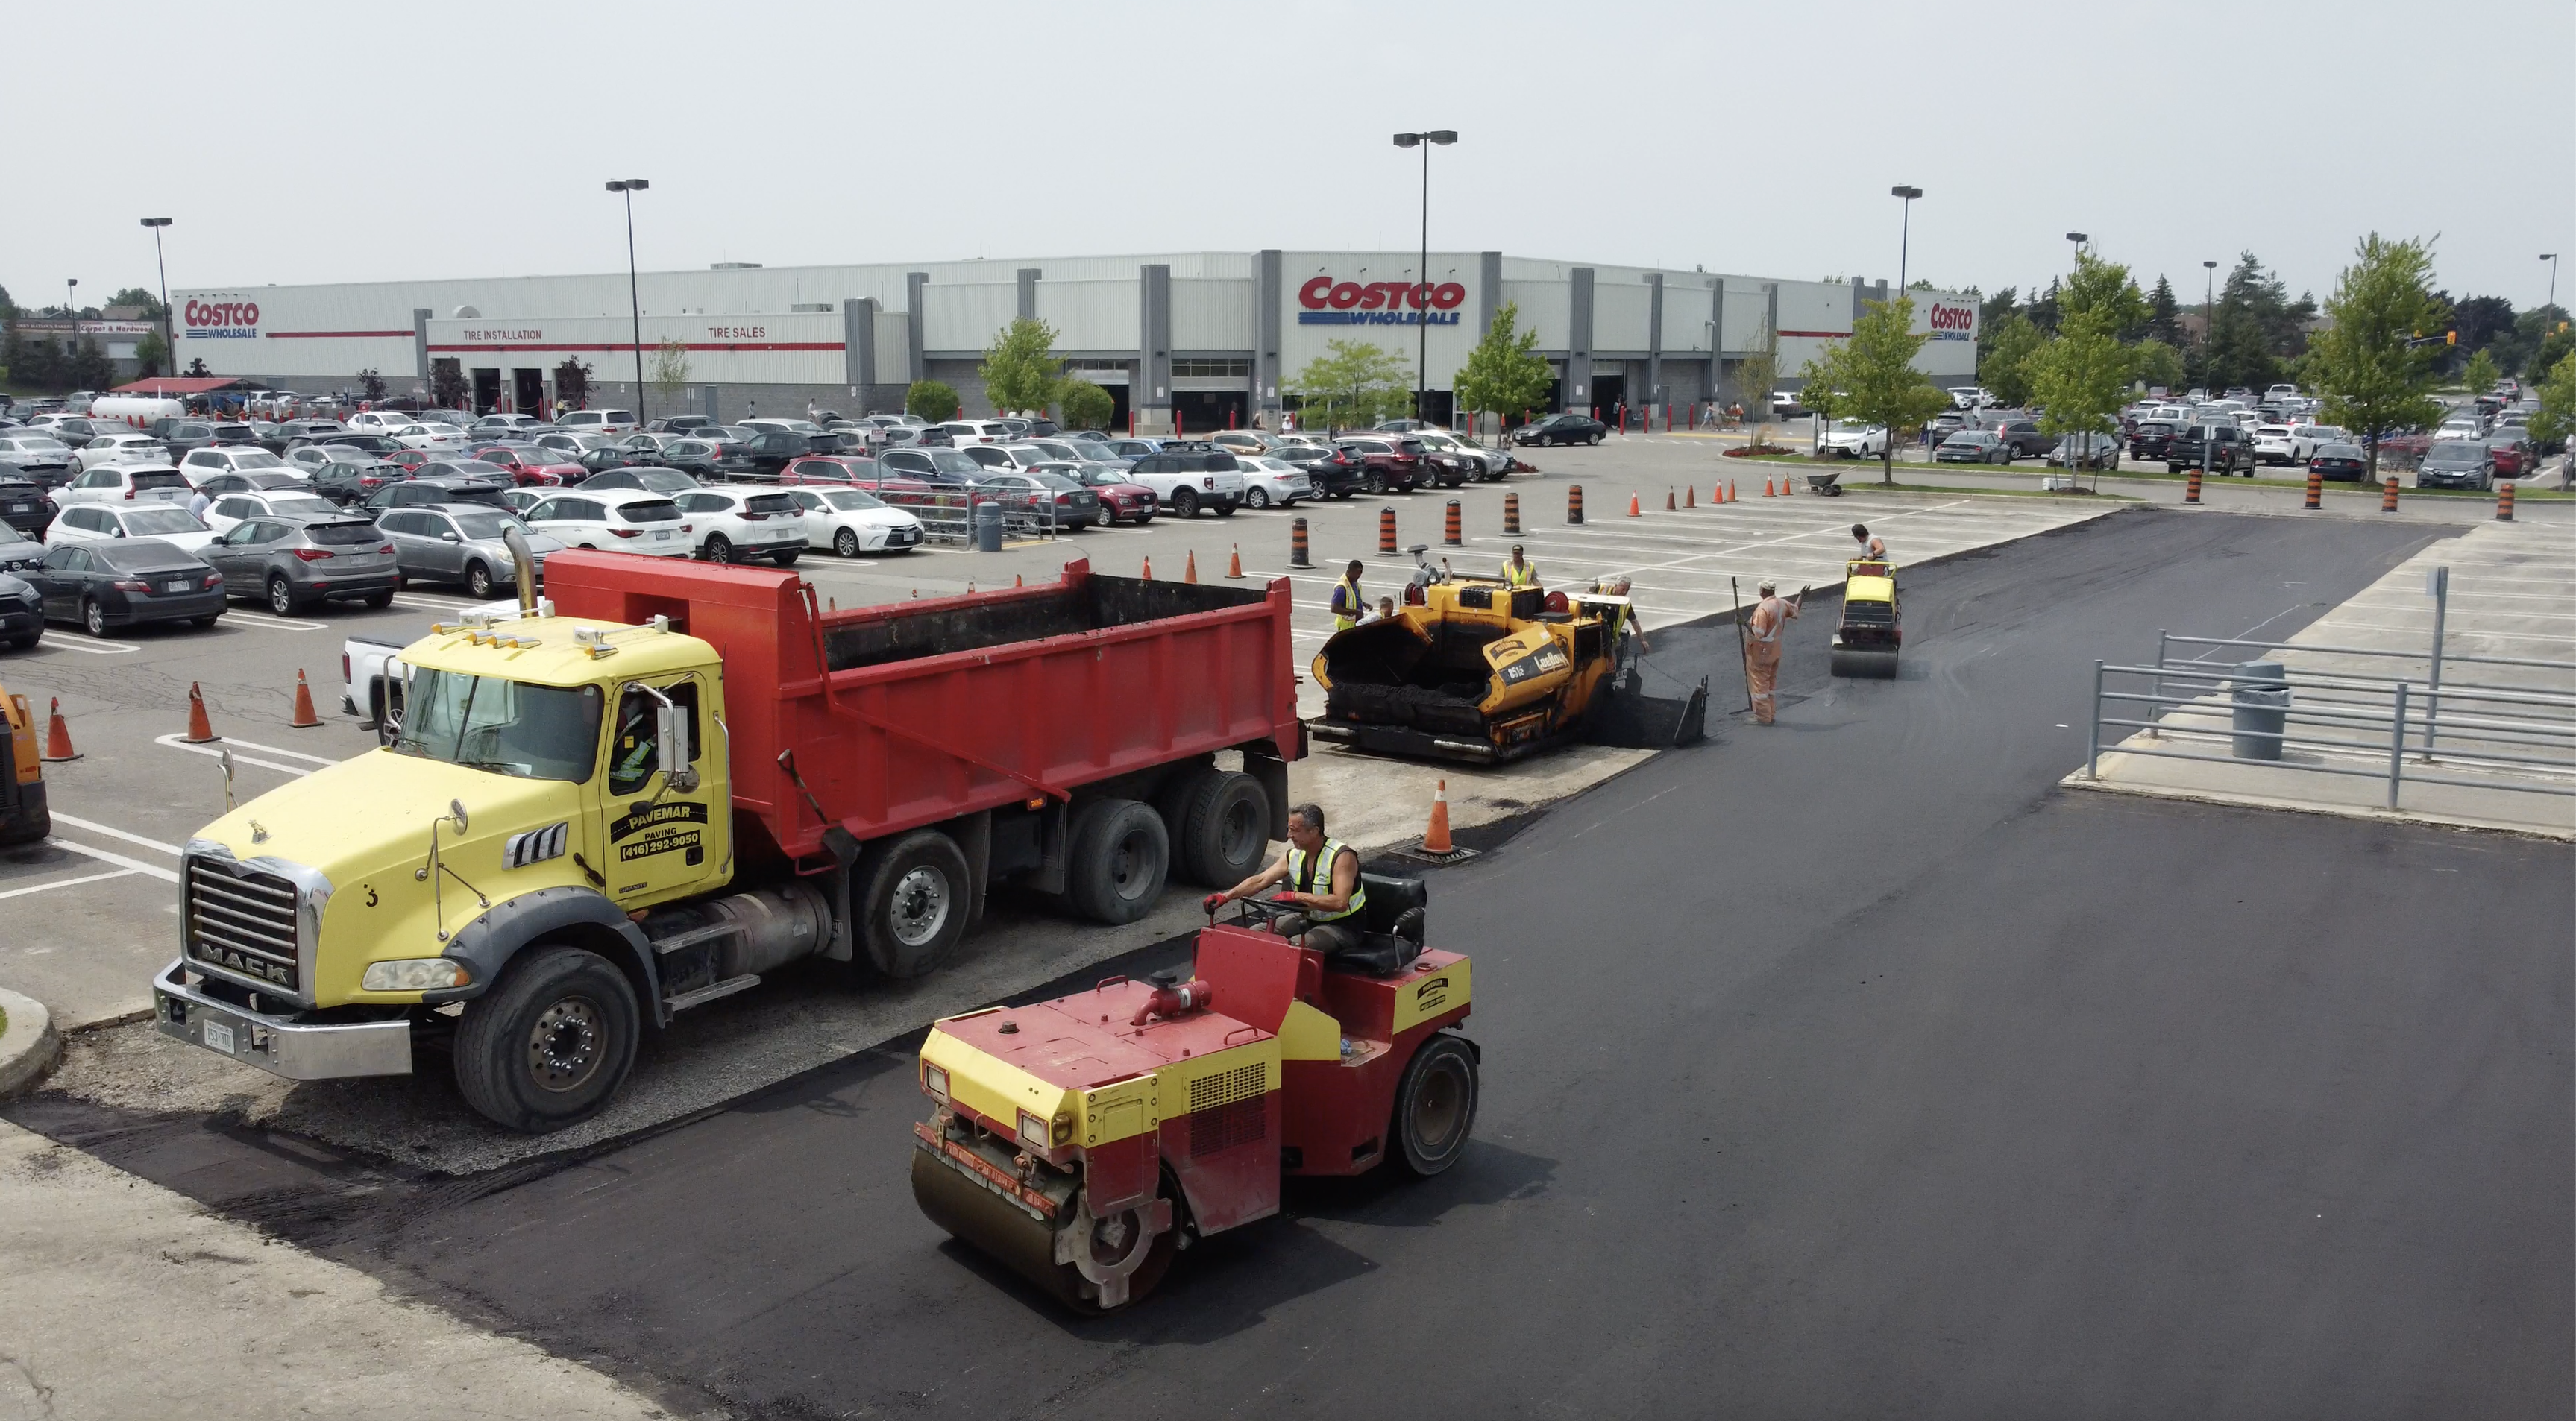 Parking Lot Repair for Costco in Mississauga| Pavemar Paving